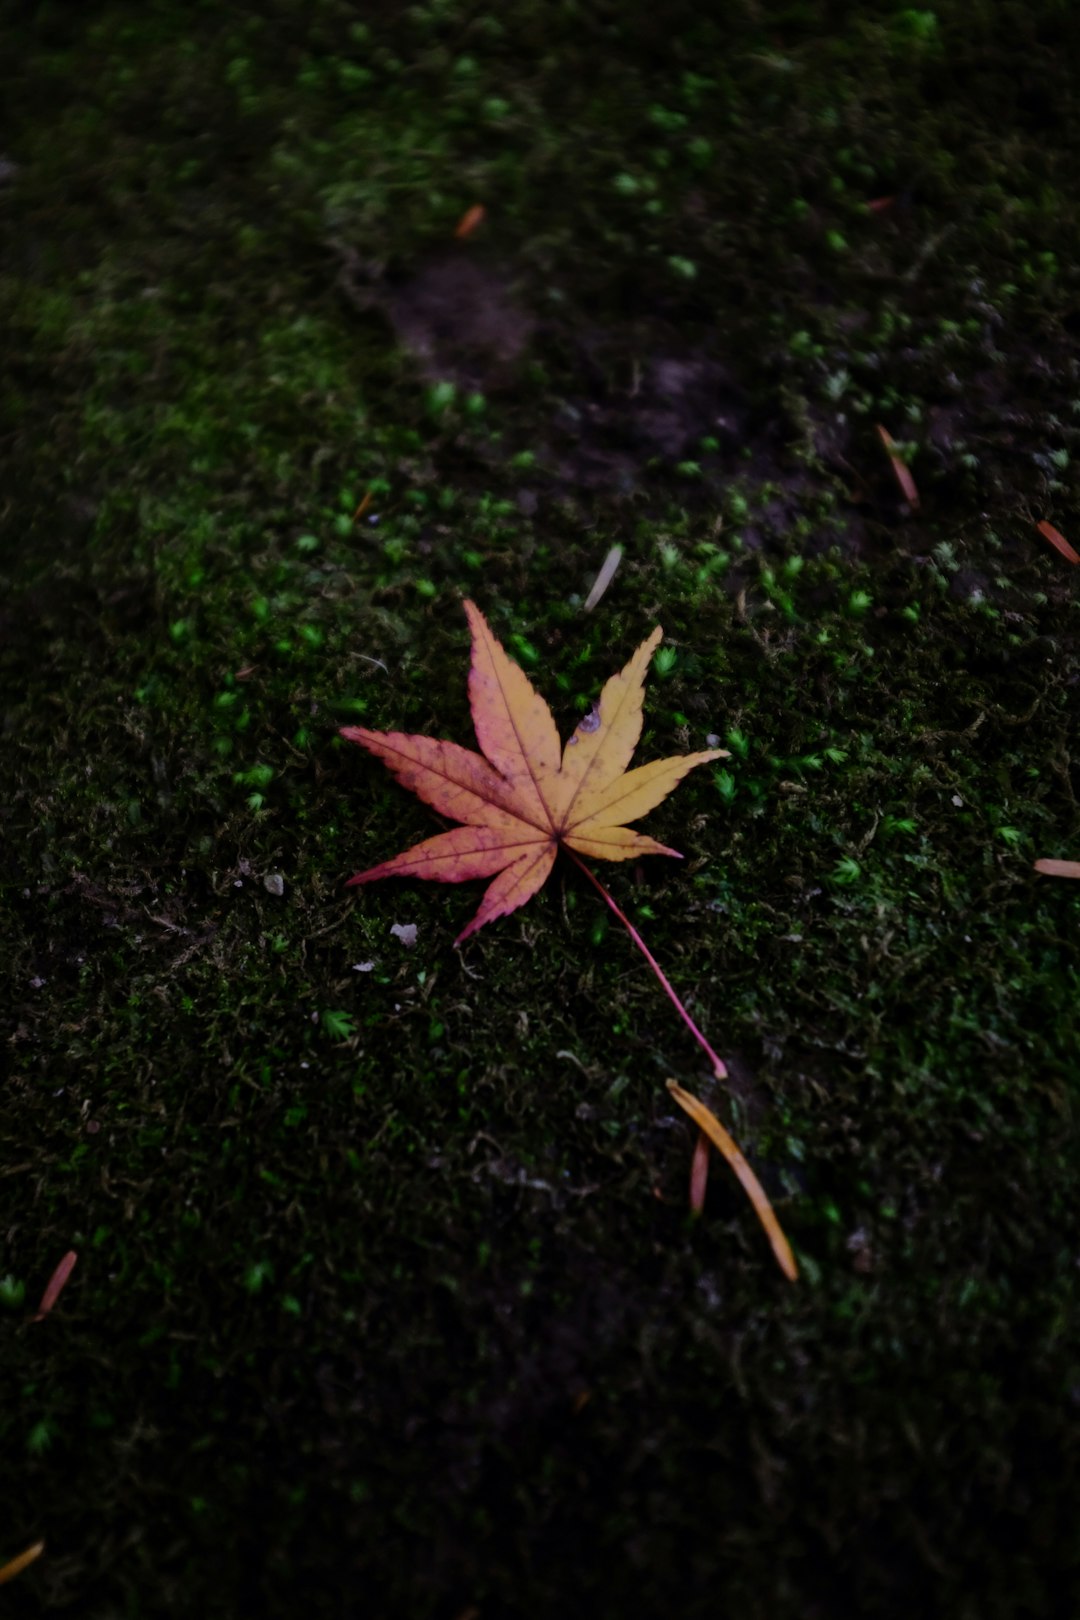 brown maple leaf on green grass